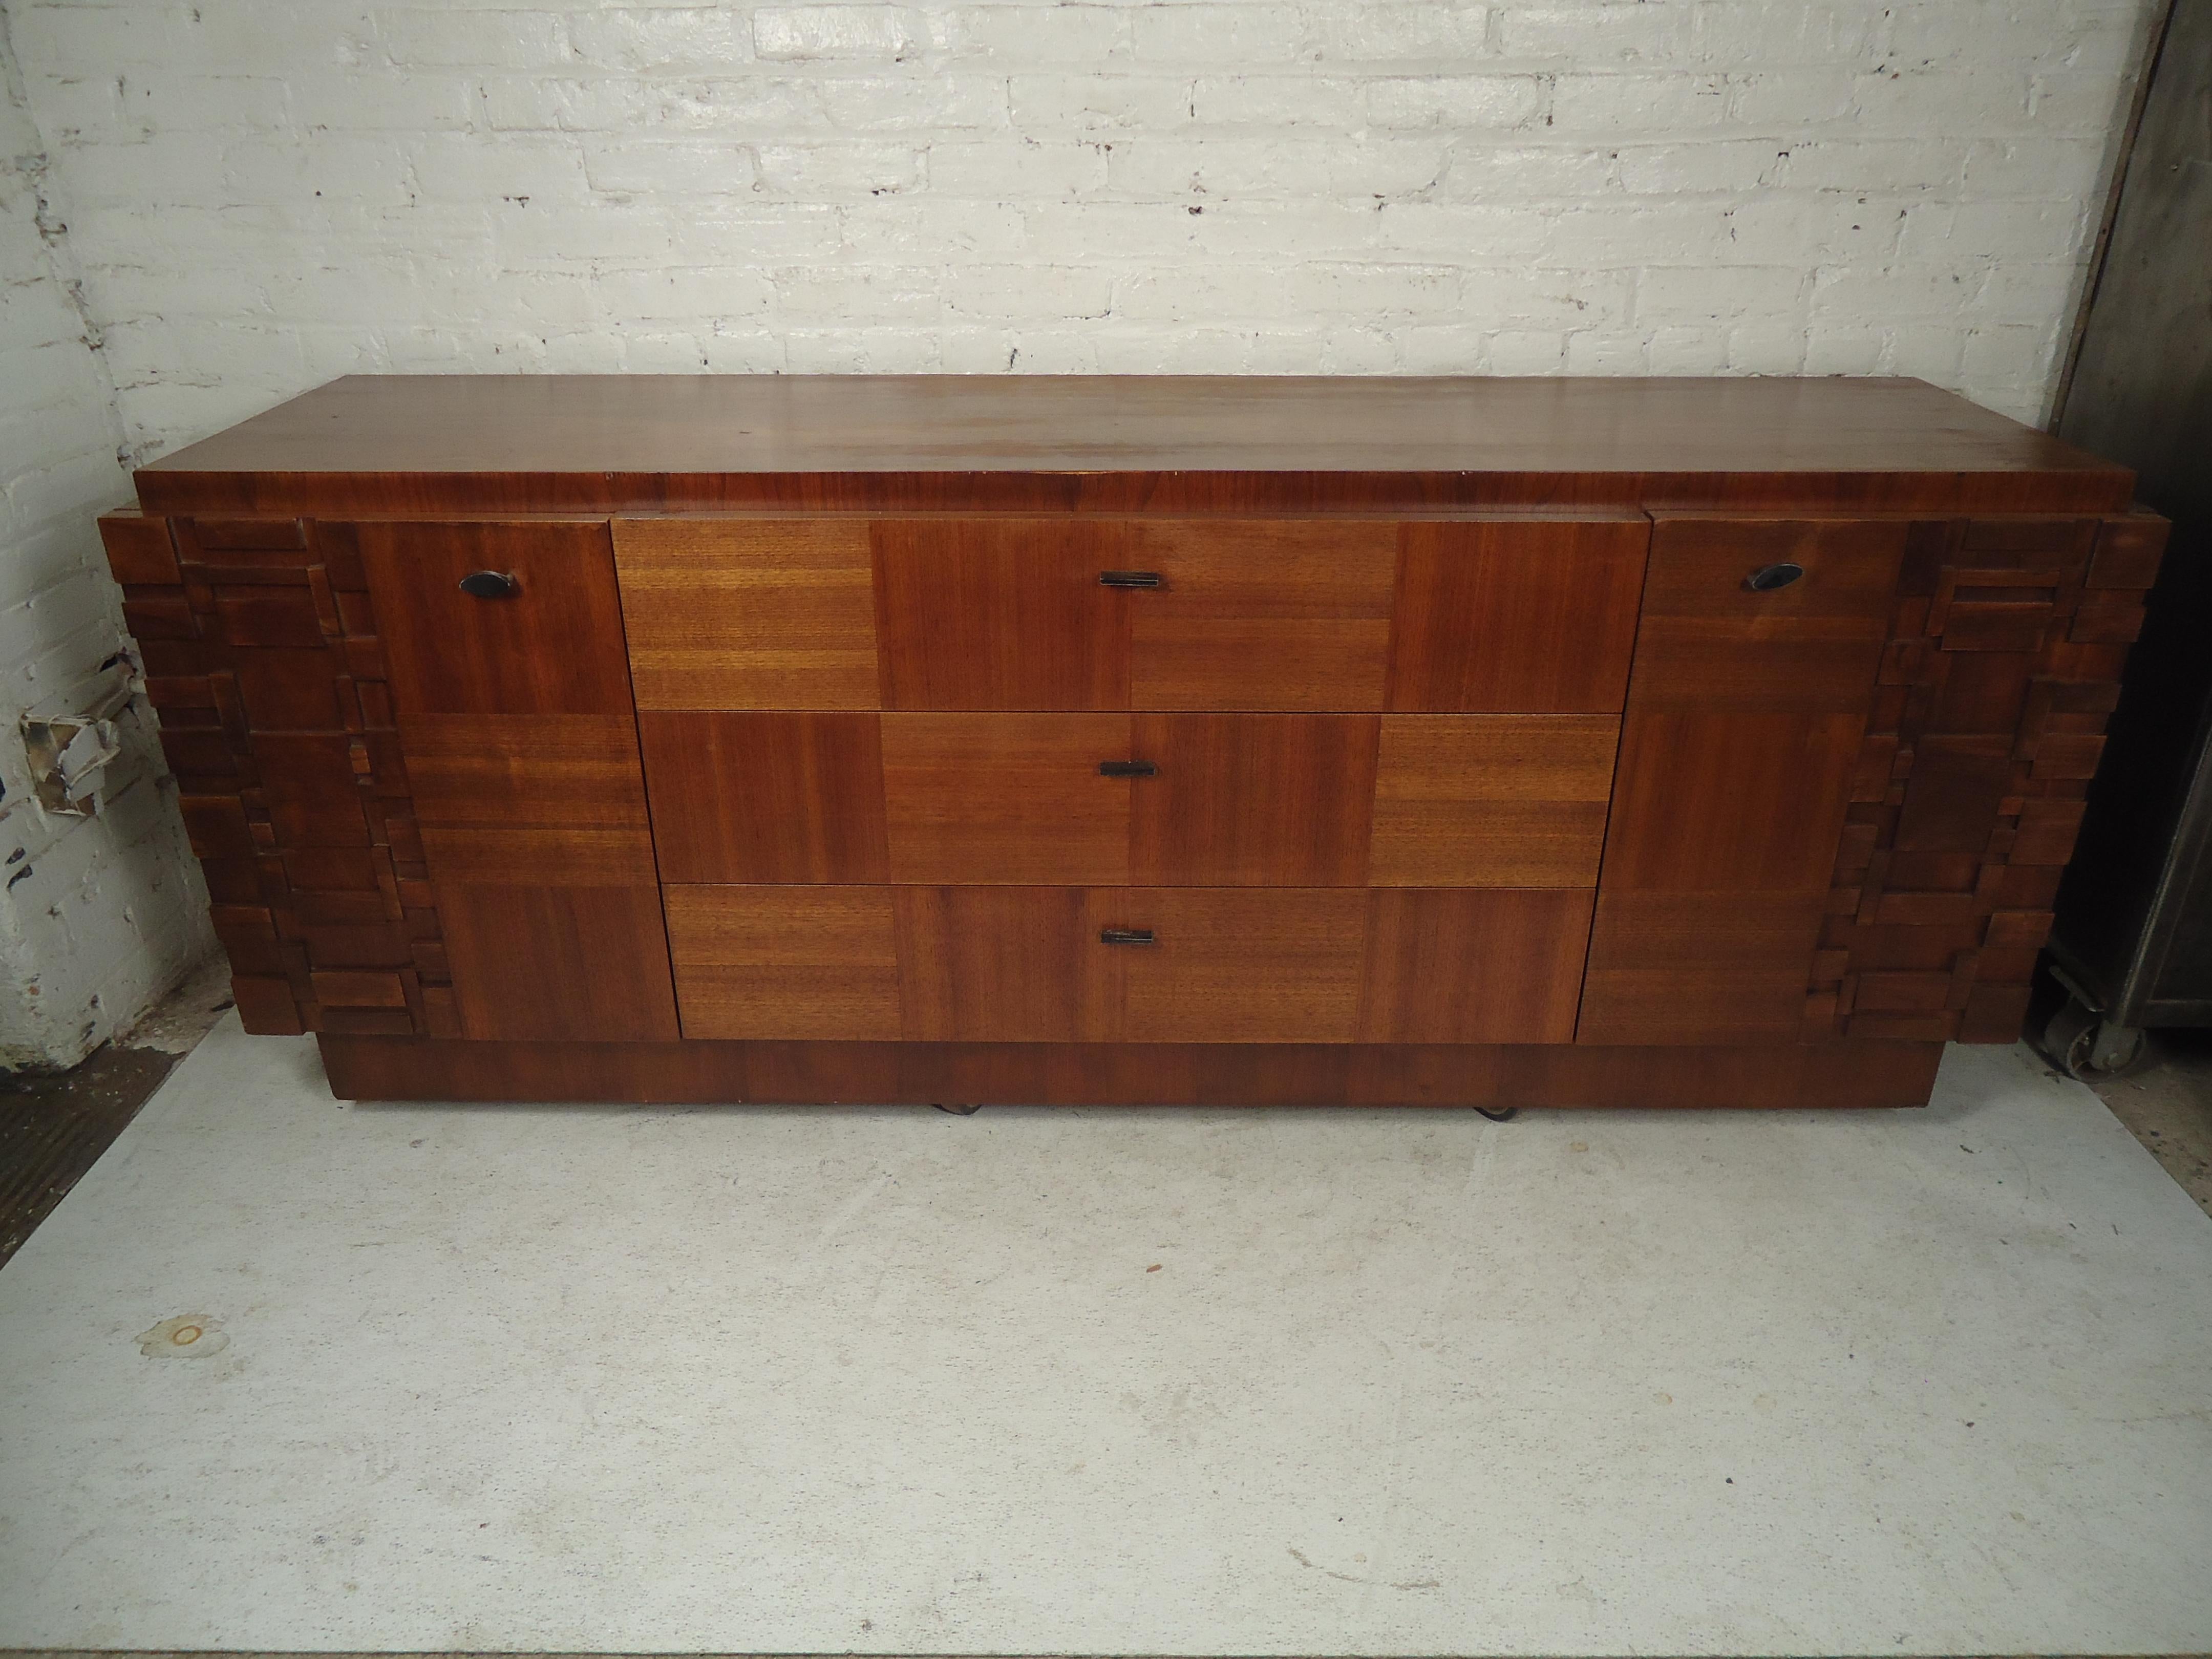 Fantastic mid-century vintage credenza from leading Canadian modern manufacturers Tobago Furniture. Featuring a fantastic carved brutalist motif with an accompanying patchwork veneer, the piece pays homage to the classic designs of Lane Furniture's